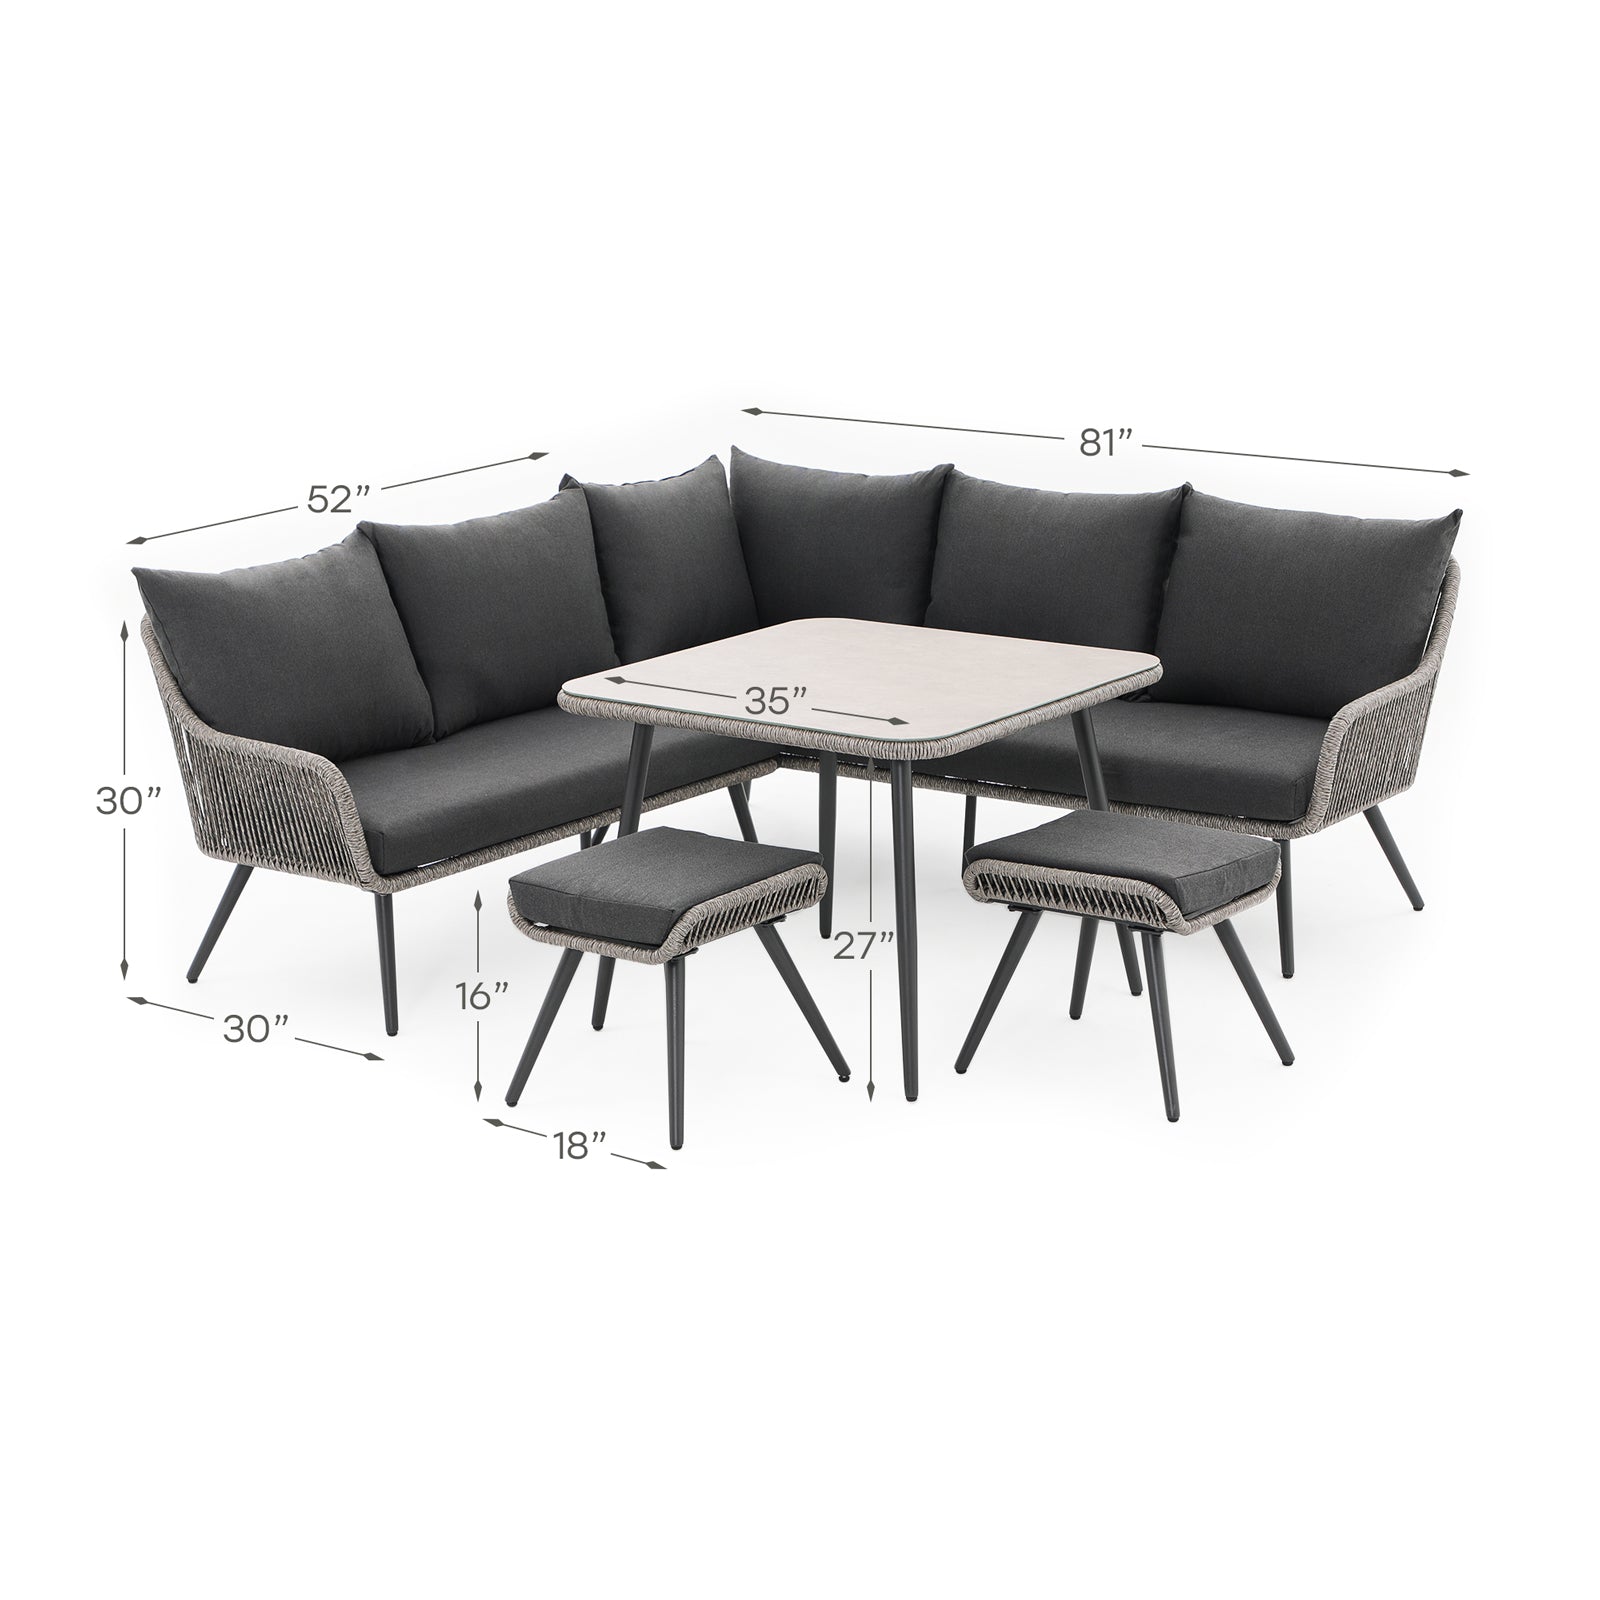 Hallerbos L-Shaped Outdoor Sectional Dining Set with steel frame, twisted rattan design, grey cushions, 1 square dining table, 5 seats sectional sofa, 2 ottomans, dimension- Jardina Furniture#Color_Grey